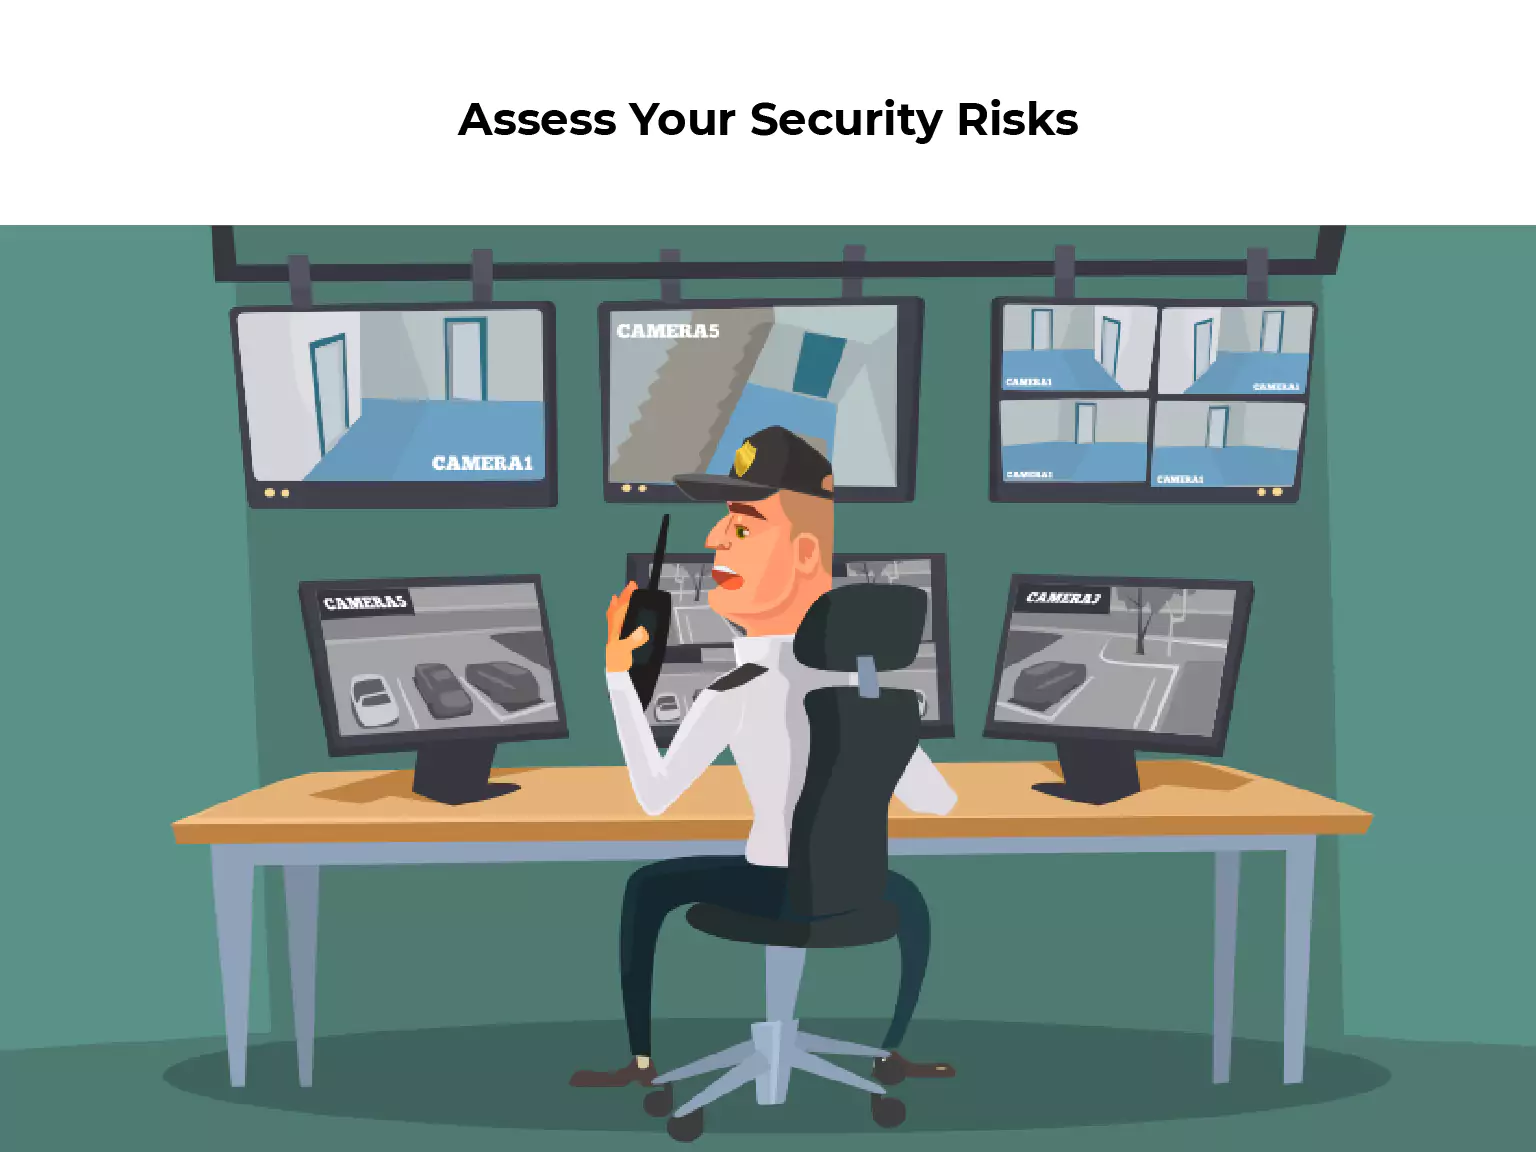 Assess Your Security Risks